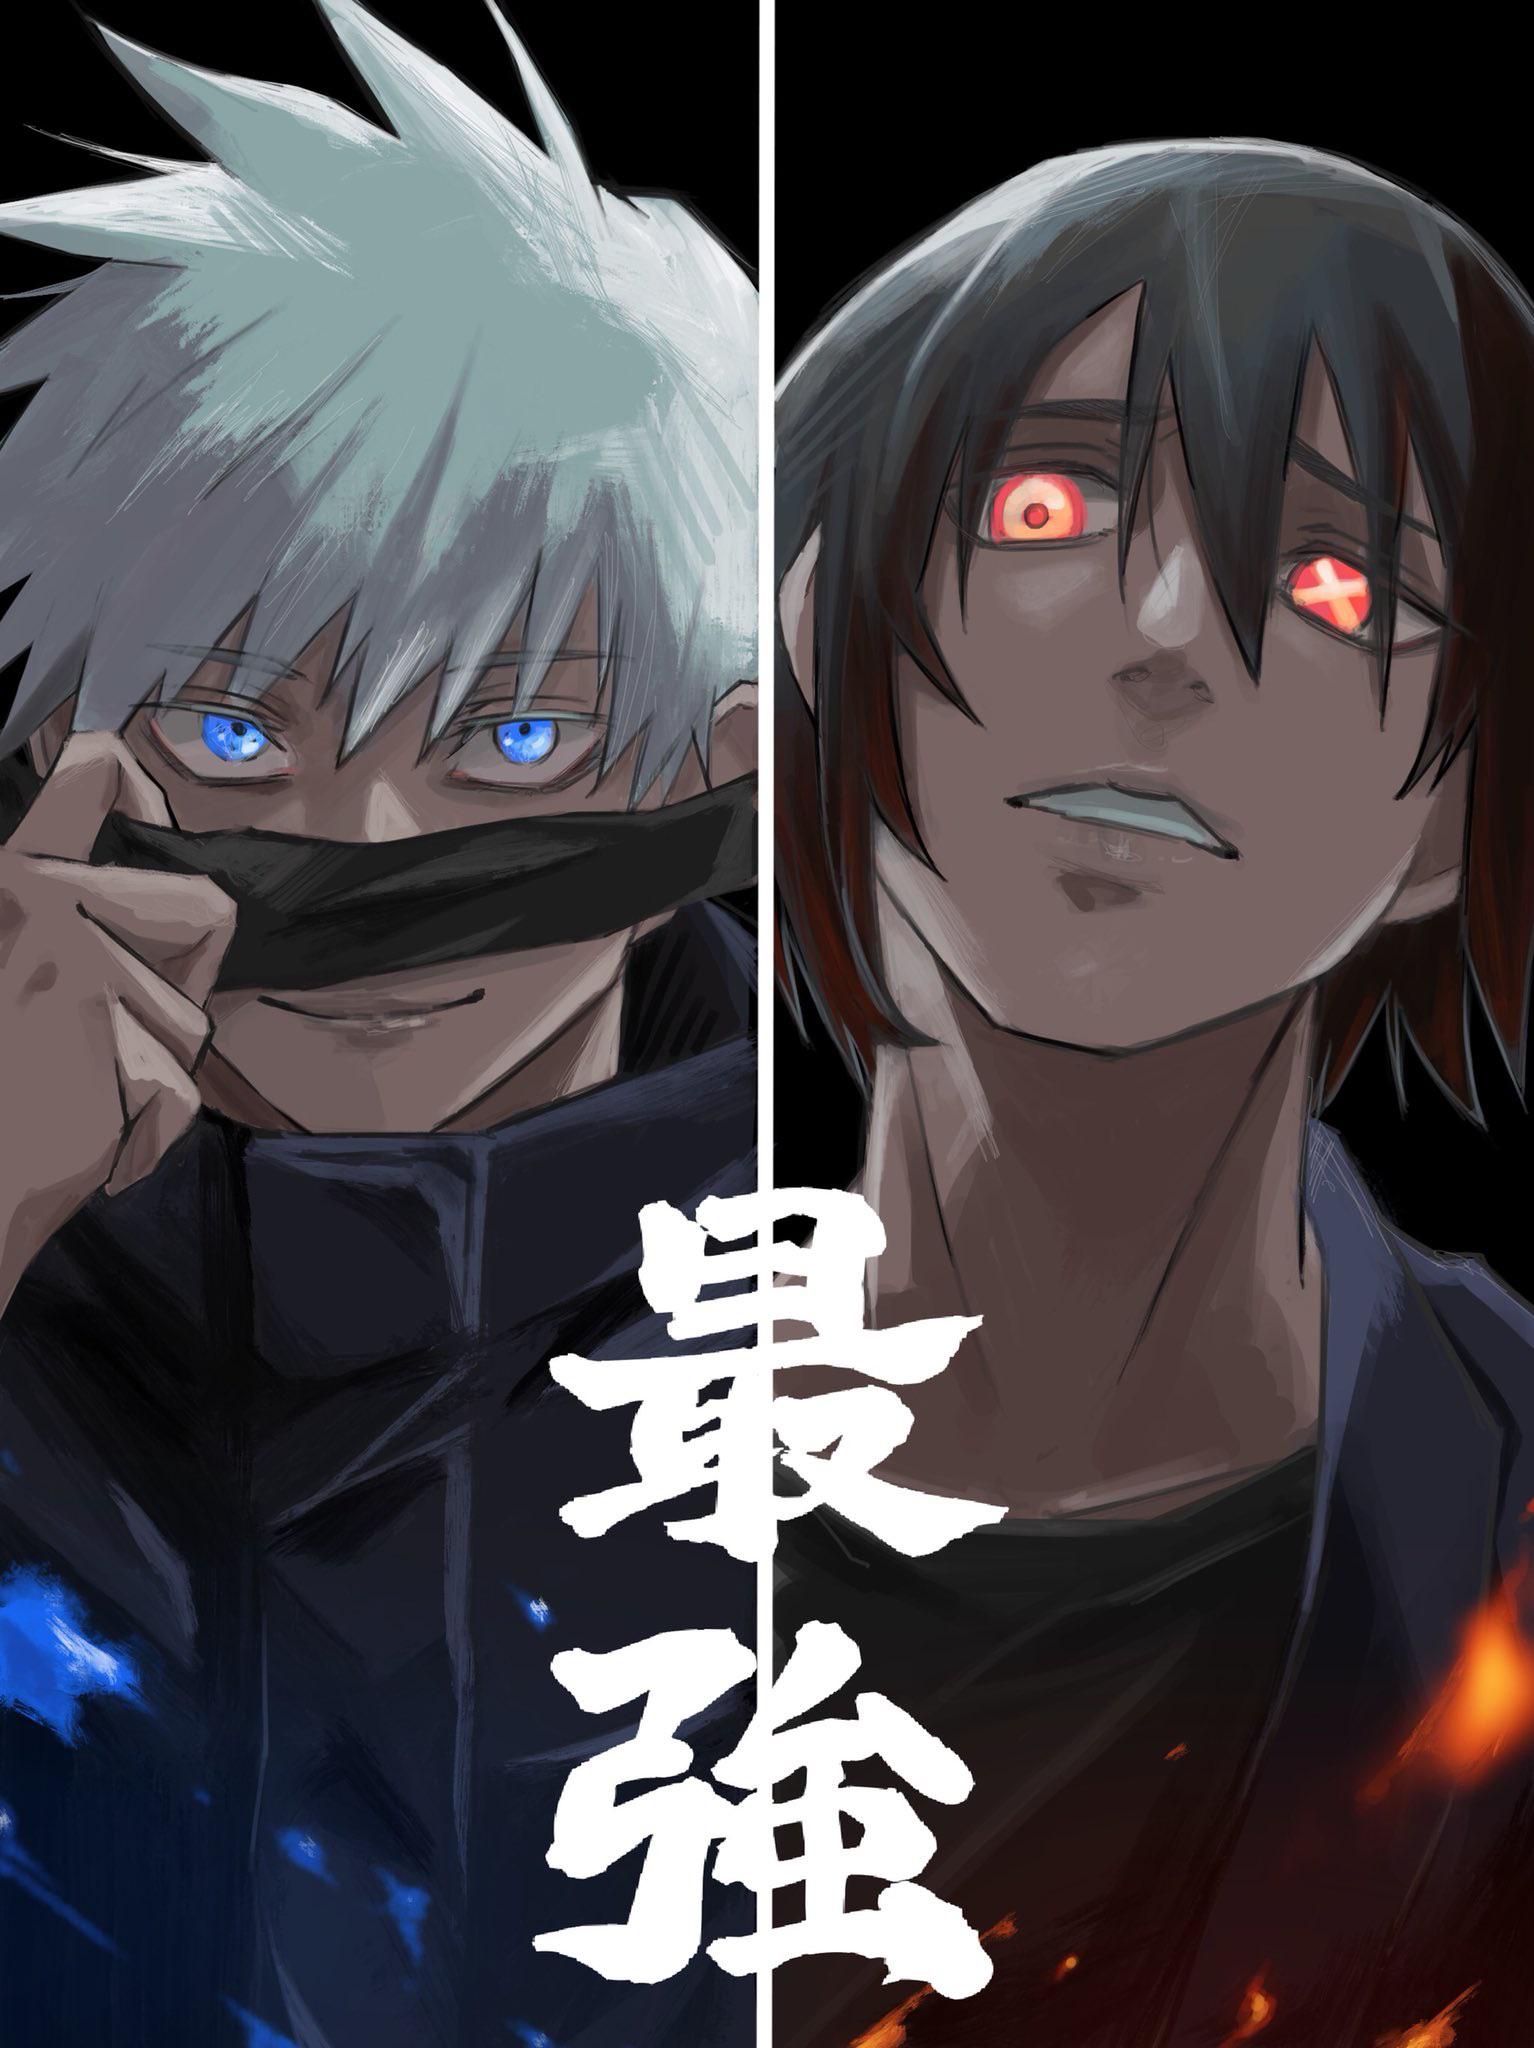 An epic crossover between Gojo and Benimaru of Fire Force.: JuJutsuKaisen